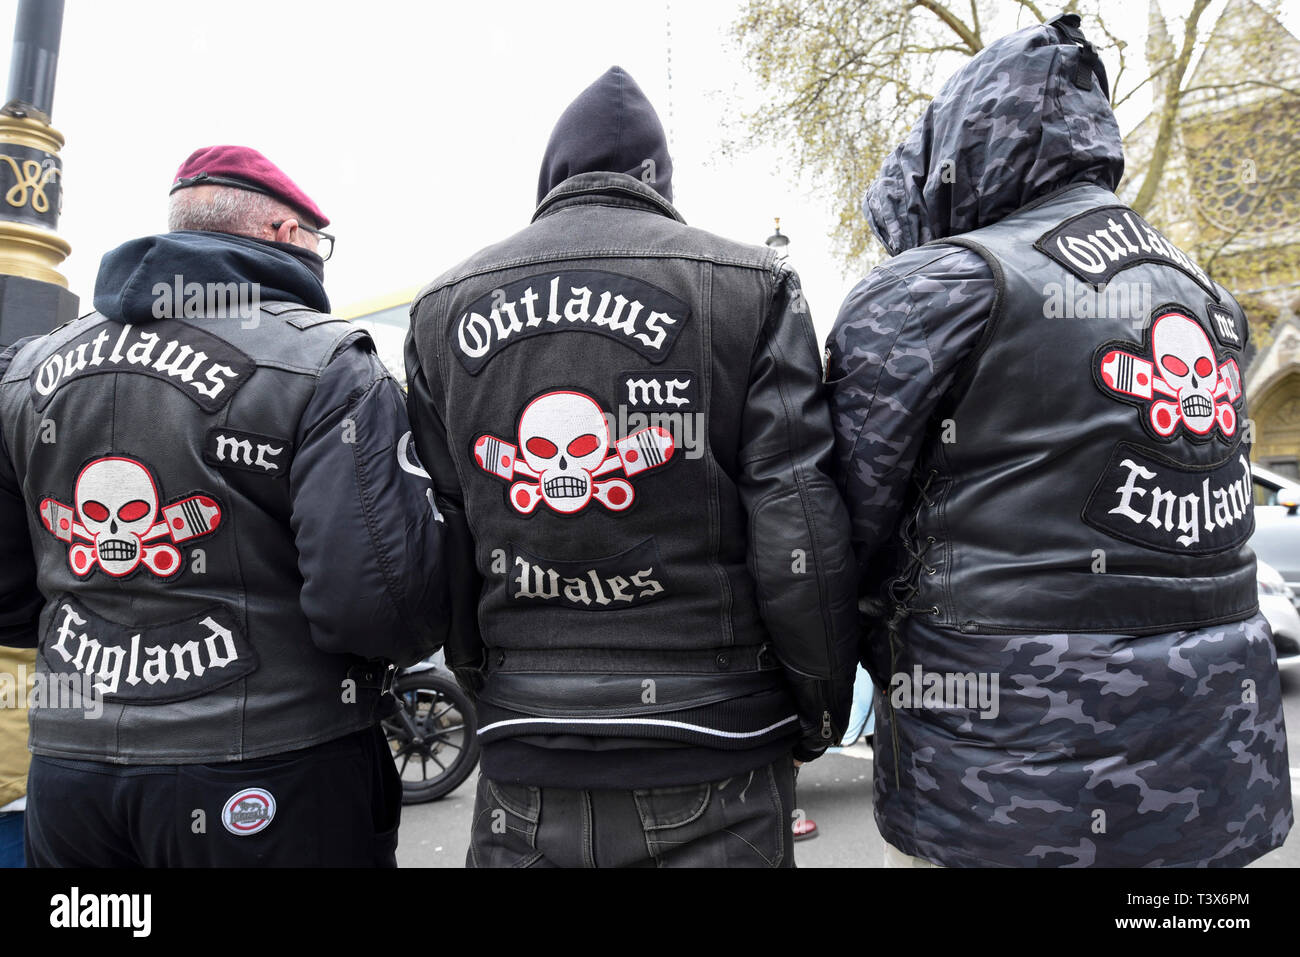 London, UK. 12th Apr 2019.Bikers in their jackets. Thousands of bikers take part in a rally called 'Rolling Thunder' in central London in support of 'Soldier F, a 77-year-old Army veteran who faces charges of murder after killing two civil rights demonstrators in Londonderry, Northern Ireland, in 1972, on what became known as Bloody Sunday. Credit: Stephen Chung/Alamy Live News Stock Photo